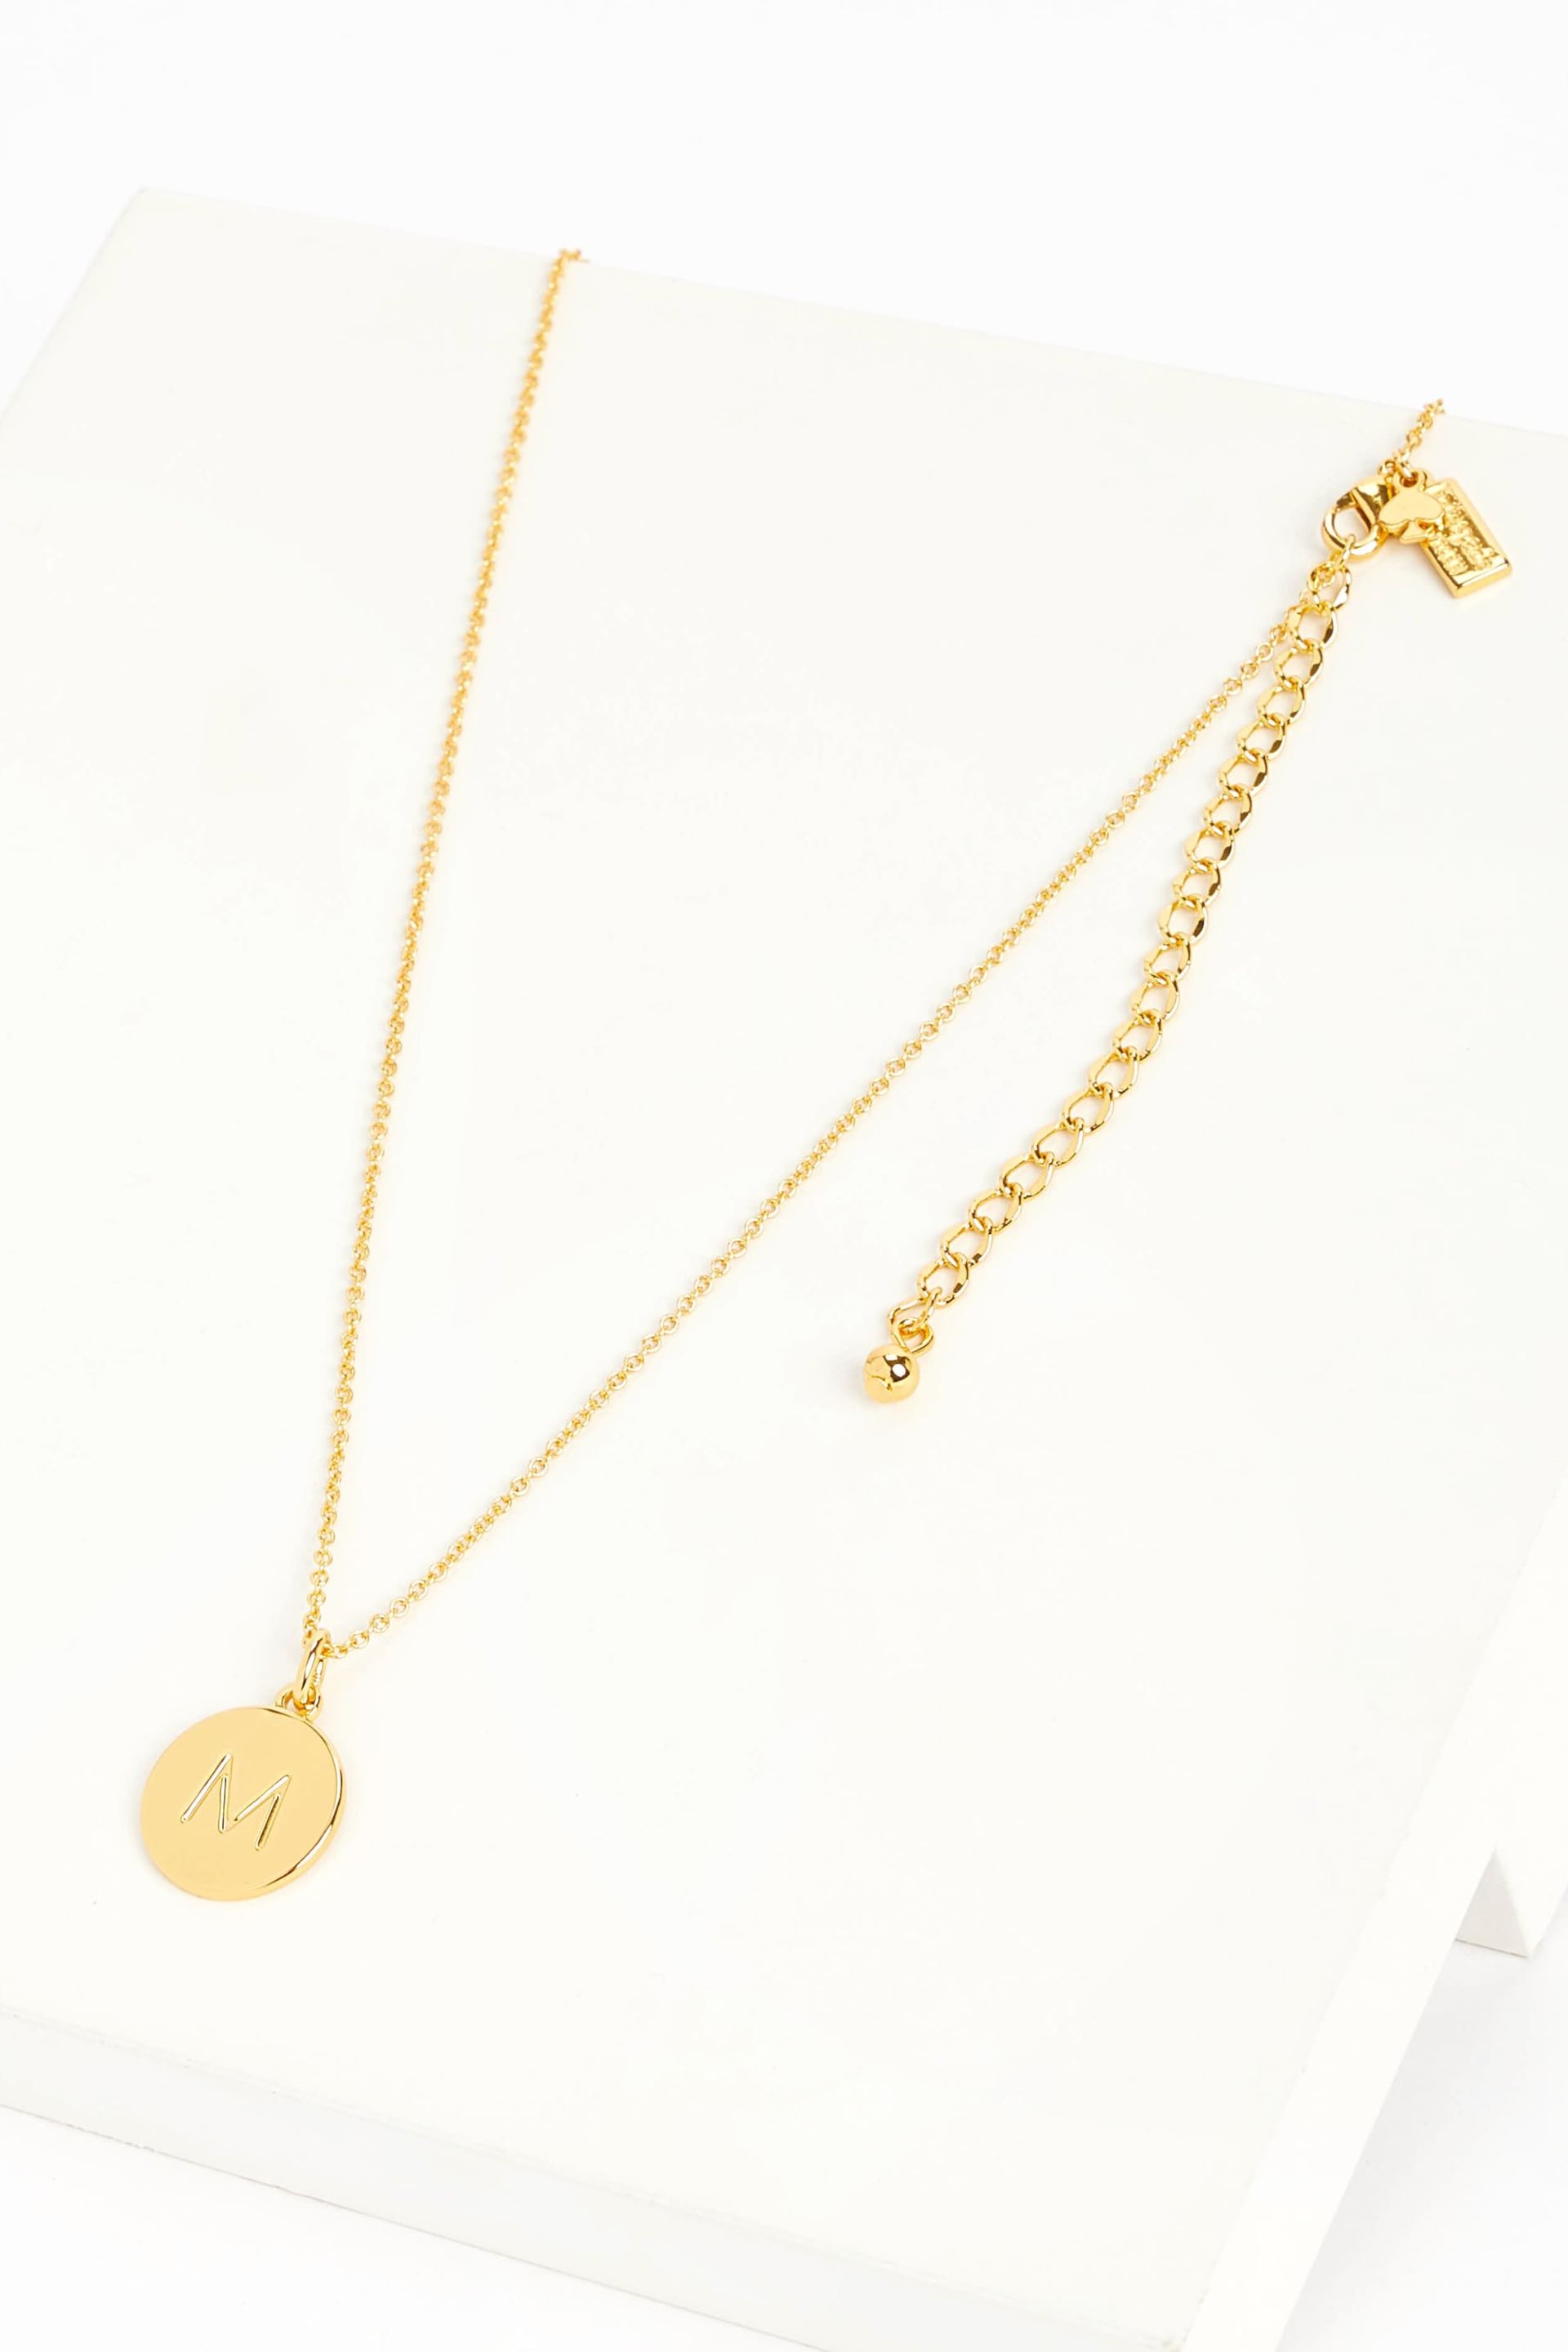 Kate Spade New york Gold Tone Initial Letter Pendant Necklace - Image 1 of 3